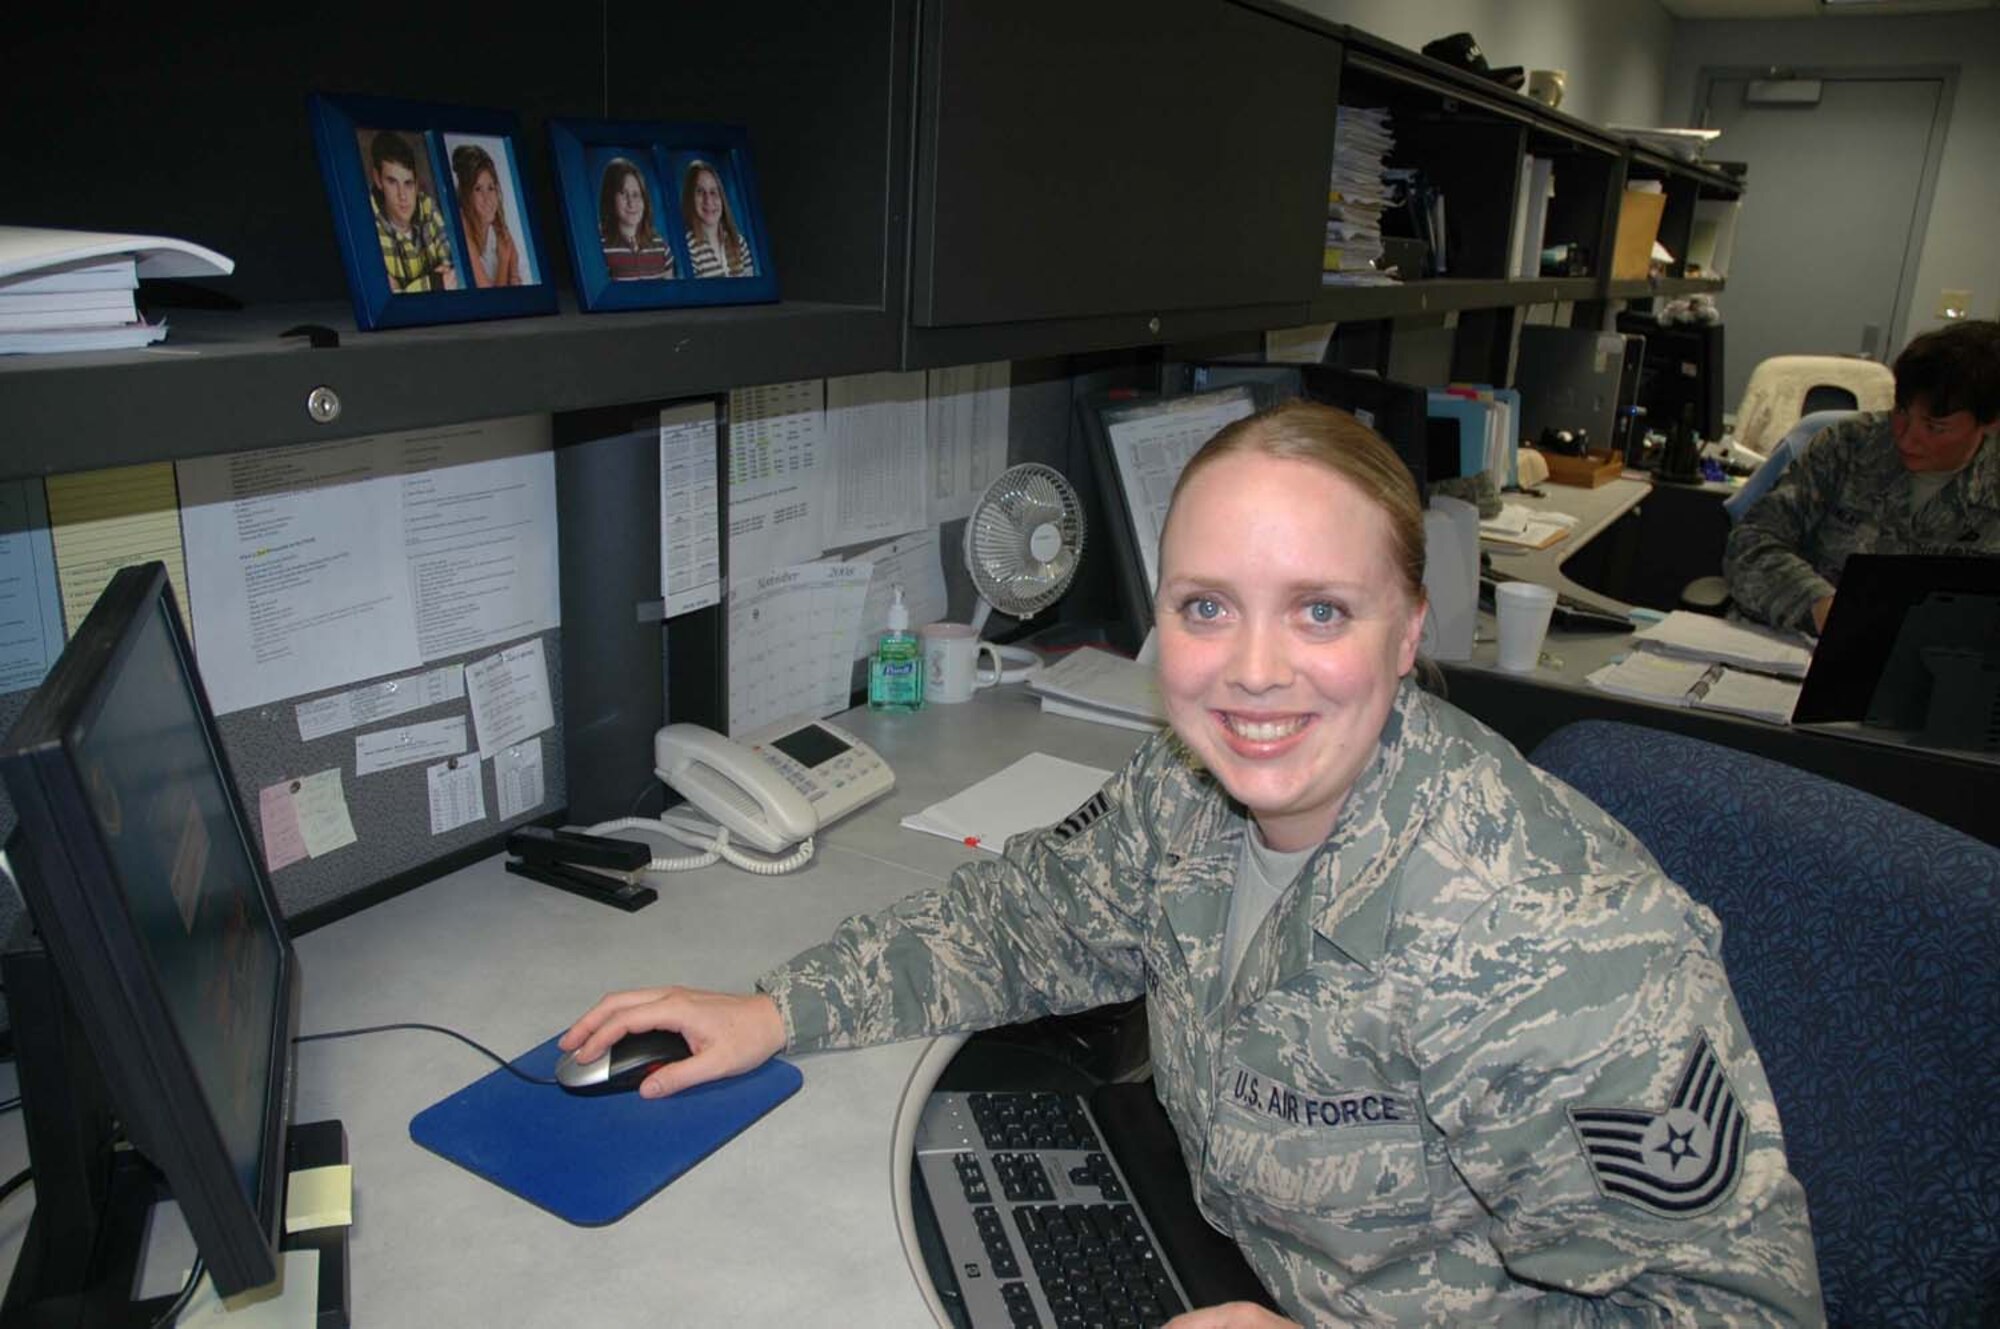 Tech. Sgt. Amy Baker takes a break from money matters in the 446th Airlift Wing's Financial Management Office.  Sergeant Baker is a financial management and comptroller specialist in the Air Force Reserve.  In her civilian occupation, she works as a recreational therapist with Providence Health System in Washington.  After 12 years of service, Sergeant Baker likes the camaraderie of serving in the Reserve. She is one of more than 2,400 Citizen Airmen in the 446th AW serving our nation. (U.S. Air Force photo/2nd Lt. Candice Allen